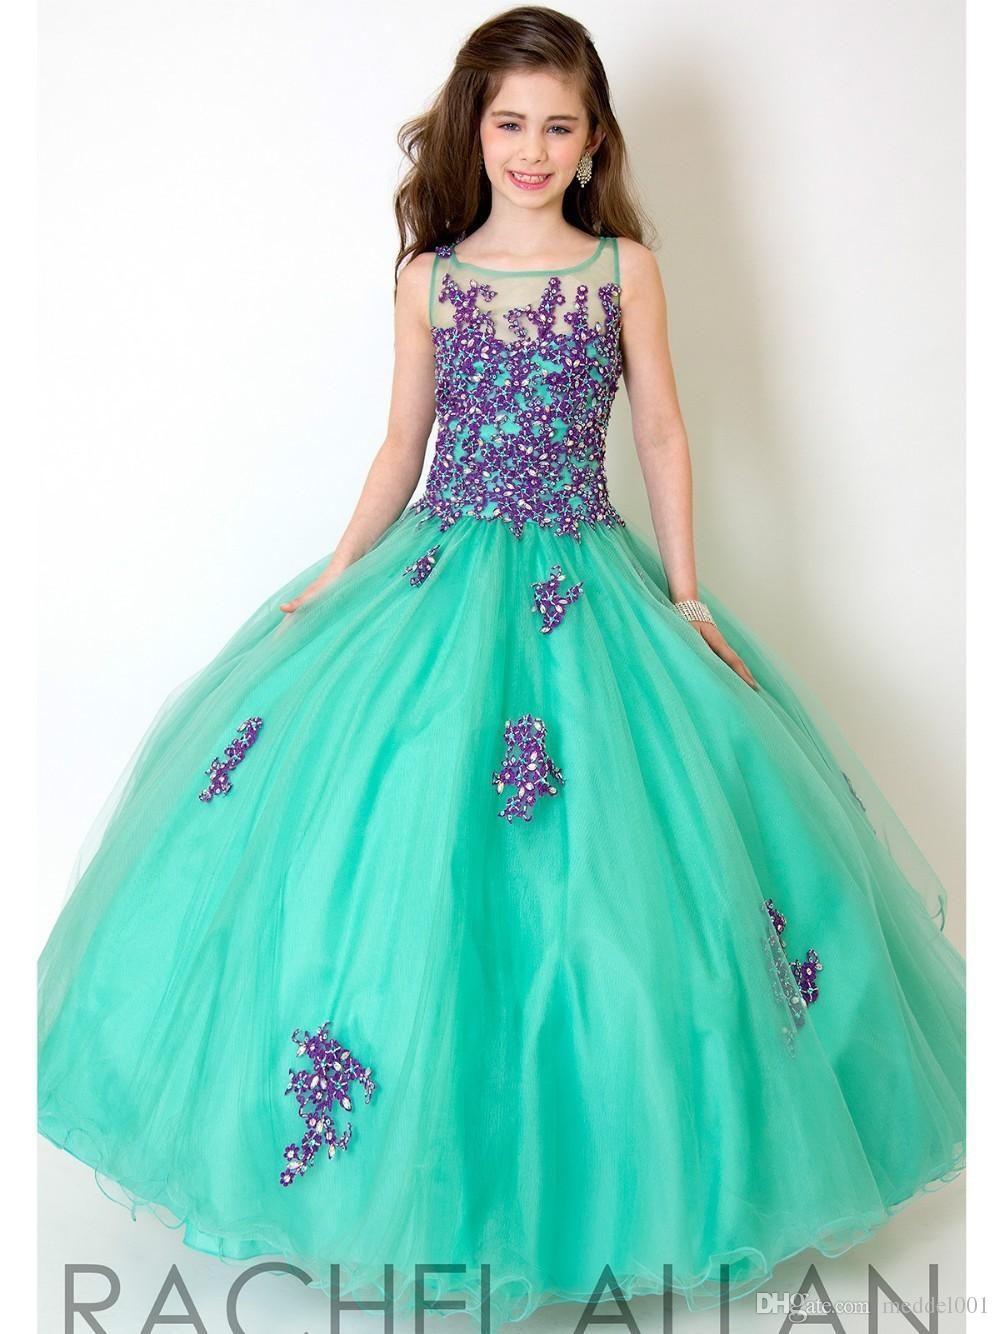 gown for girls 12 years